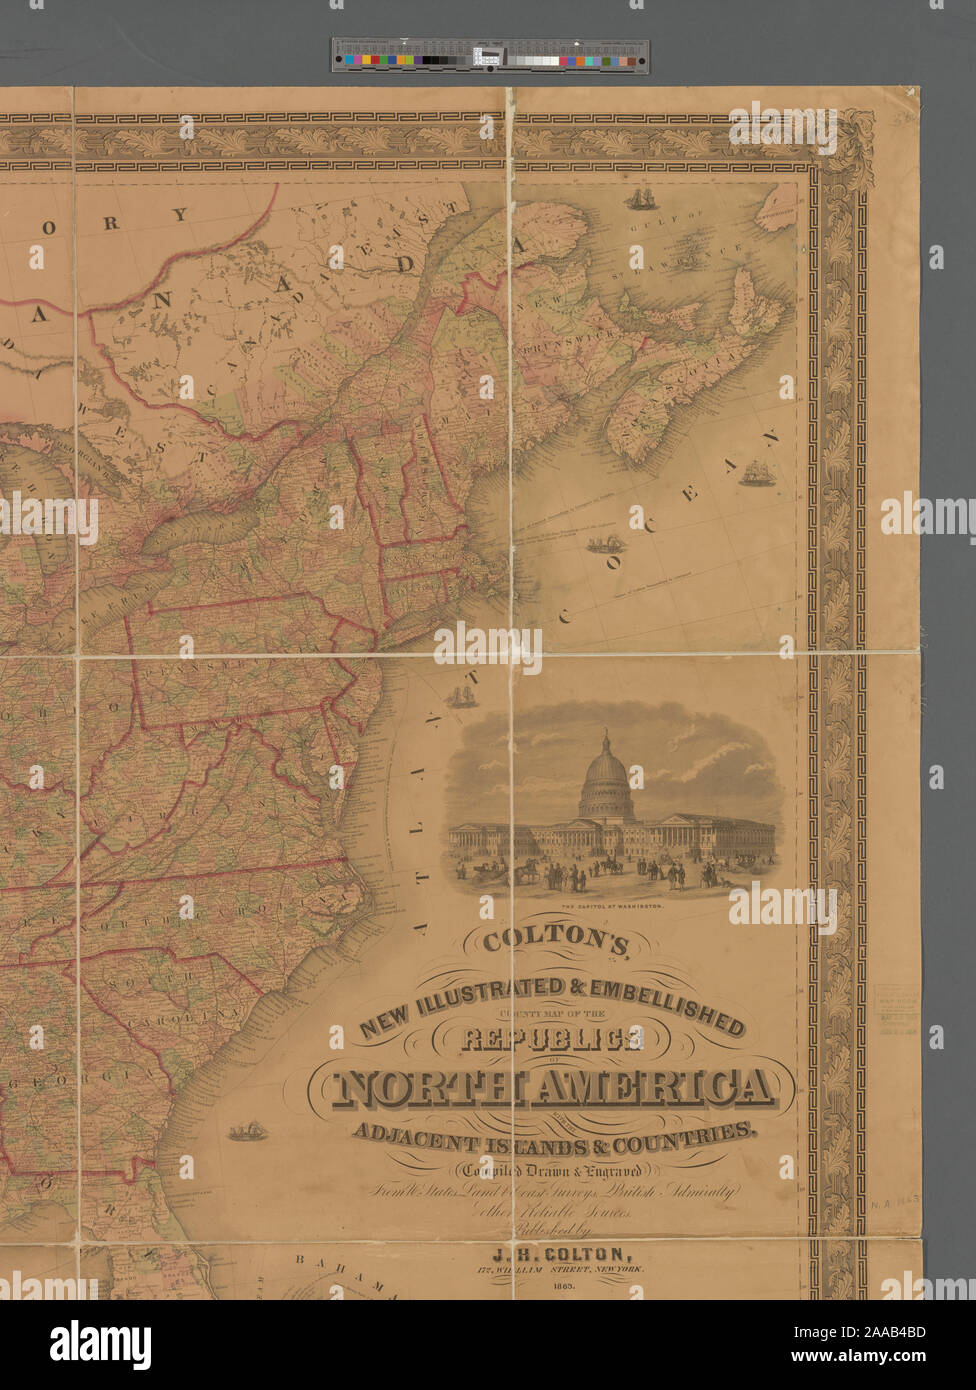 Relief shown by hachures and spot heights. Shows steamship routes and railroad lines. Prime meridians: Greenwich, Washington. Inset: Map of the World on Mercator's projection. Includes list of Authorities, table of distances, Statistical table from the census of 1850, statistical table for Central America, illustrations, and notes. Scale approximately 1:3,200,000 (W 128°--W 58°/N 50°--N 6°) Mapping the Nation (NEH grant, 2015-2018); Colton's new illustrated & embellished county map of the republics of North America Stock Photo